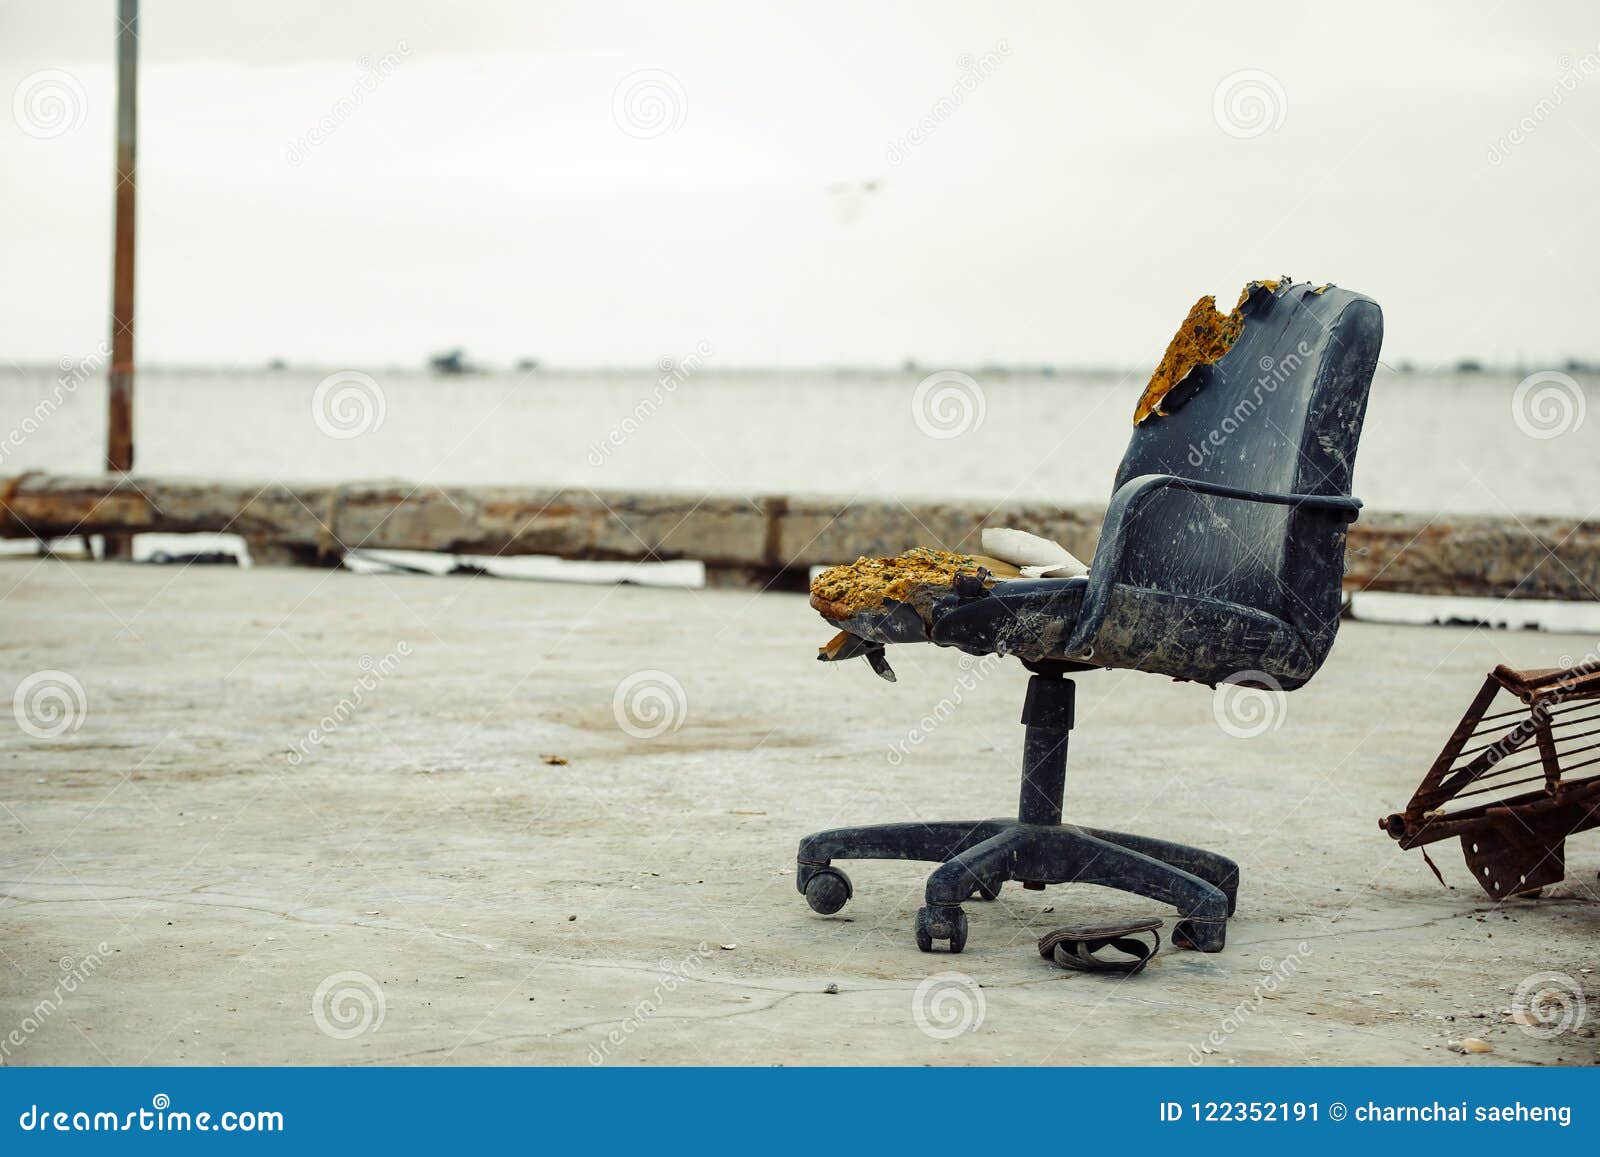 An Old Office Chair Outdoor Near The Sea And Sandals Is Under The Chair Stock Image Image Of Chair Perspective 122352191